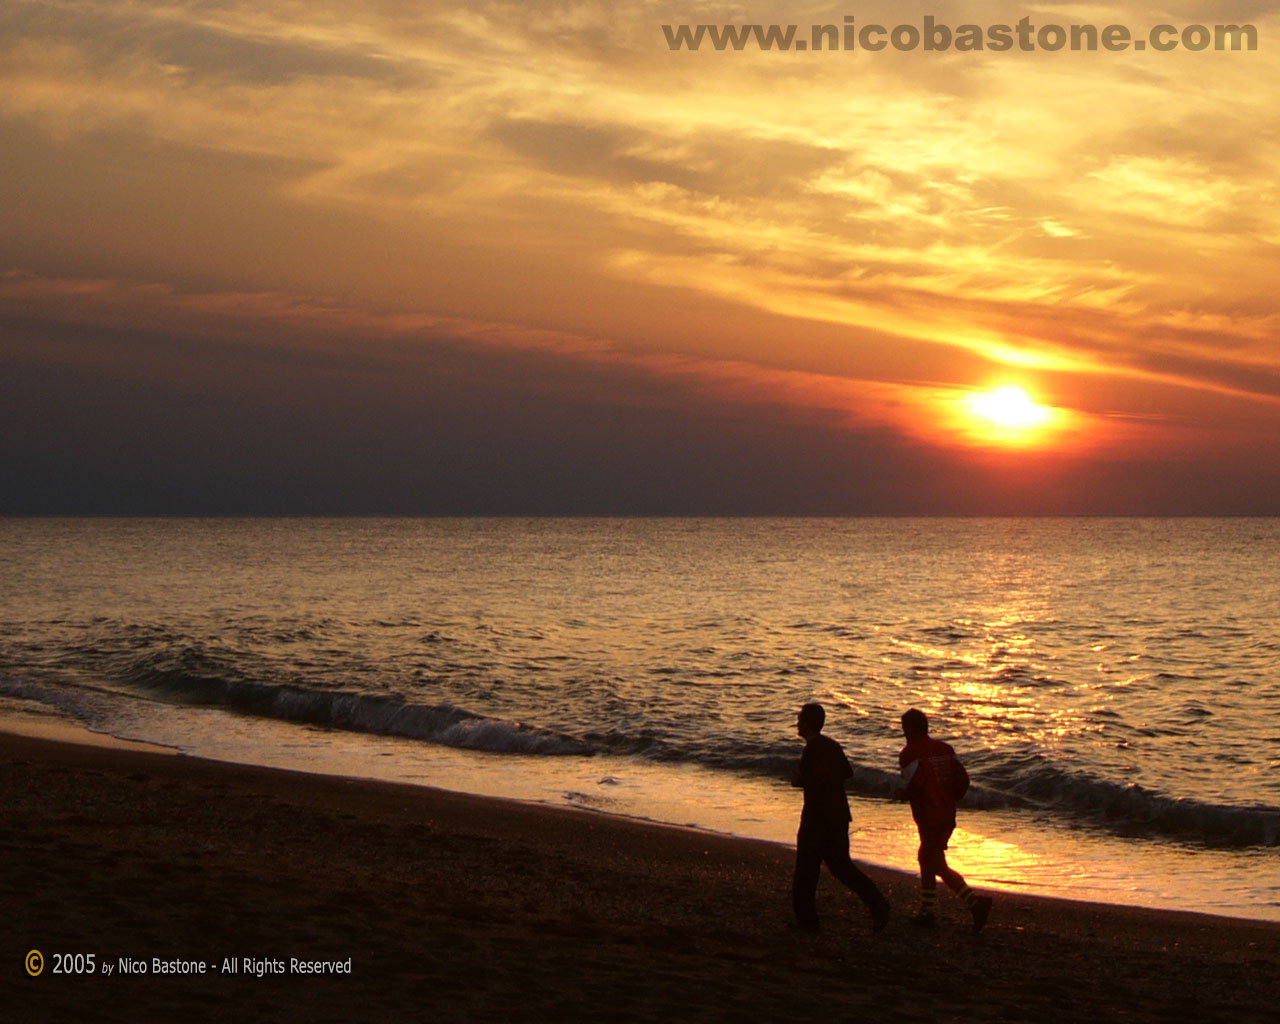 Capo d'Orlando, Messina - "Jogging at the sunset" - Wallpapers Sfondi per Desktop - Copyright by Nico Bastone - All Rights Reserved